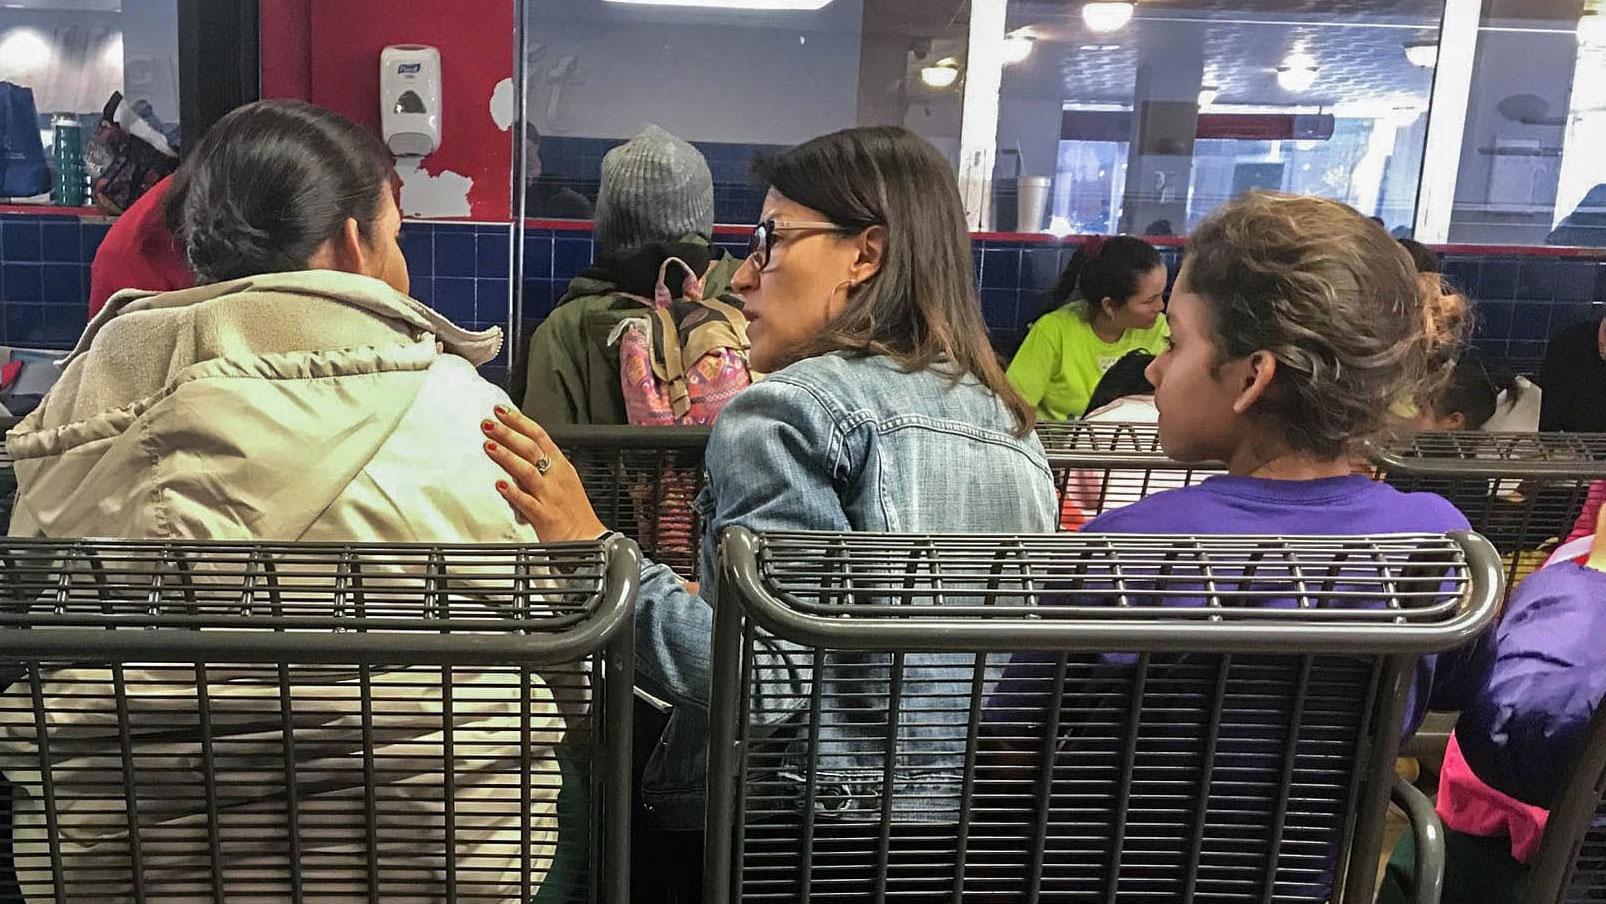 Alicia Cruz, in the center of the photograph, is shown wearing a jean jacket and putting her left hand on the shoulder of the woman next to her.